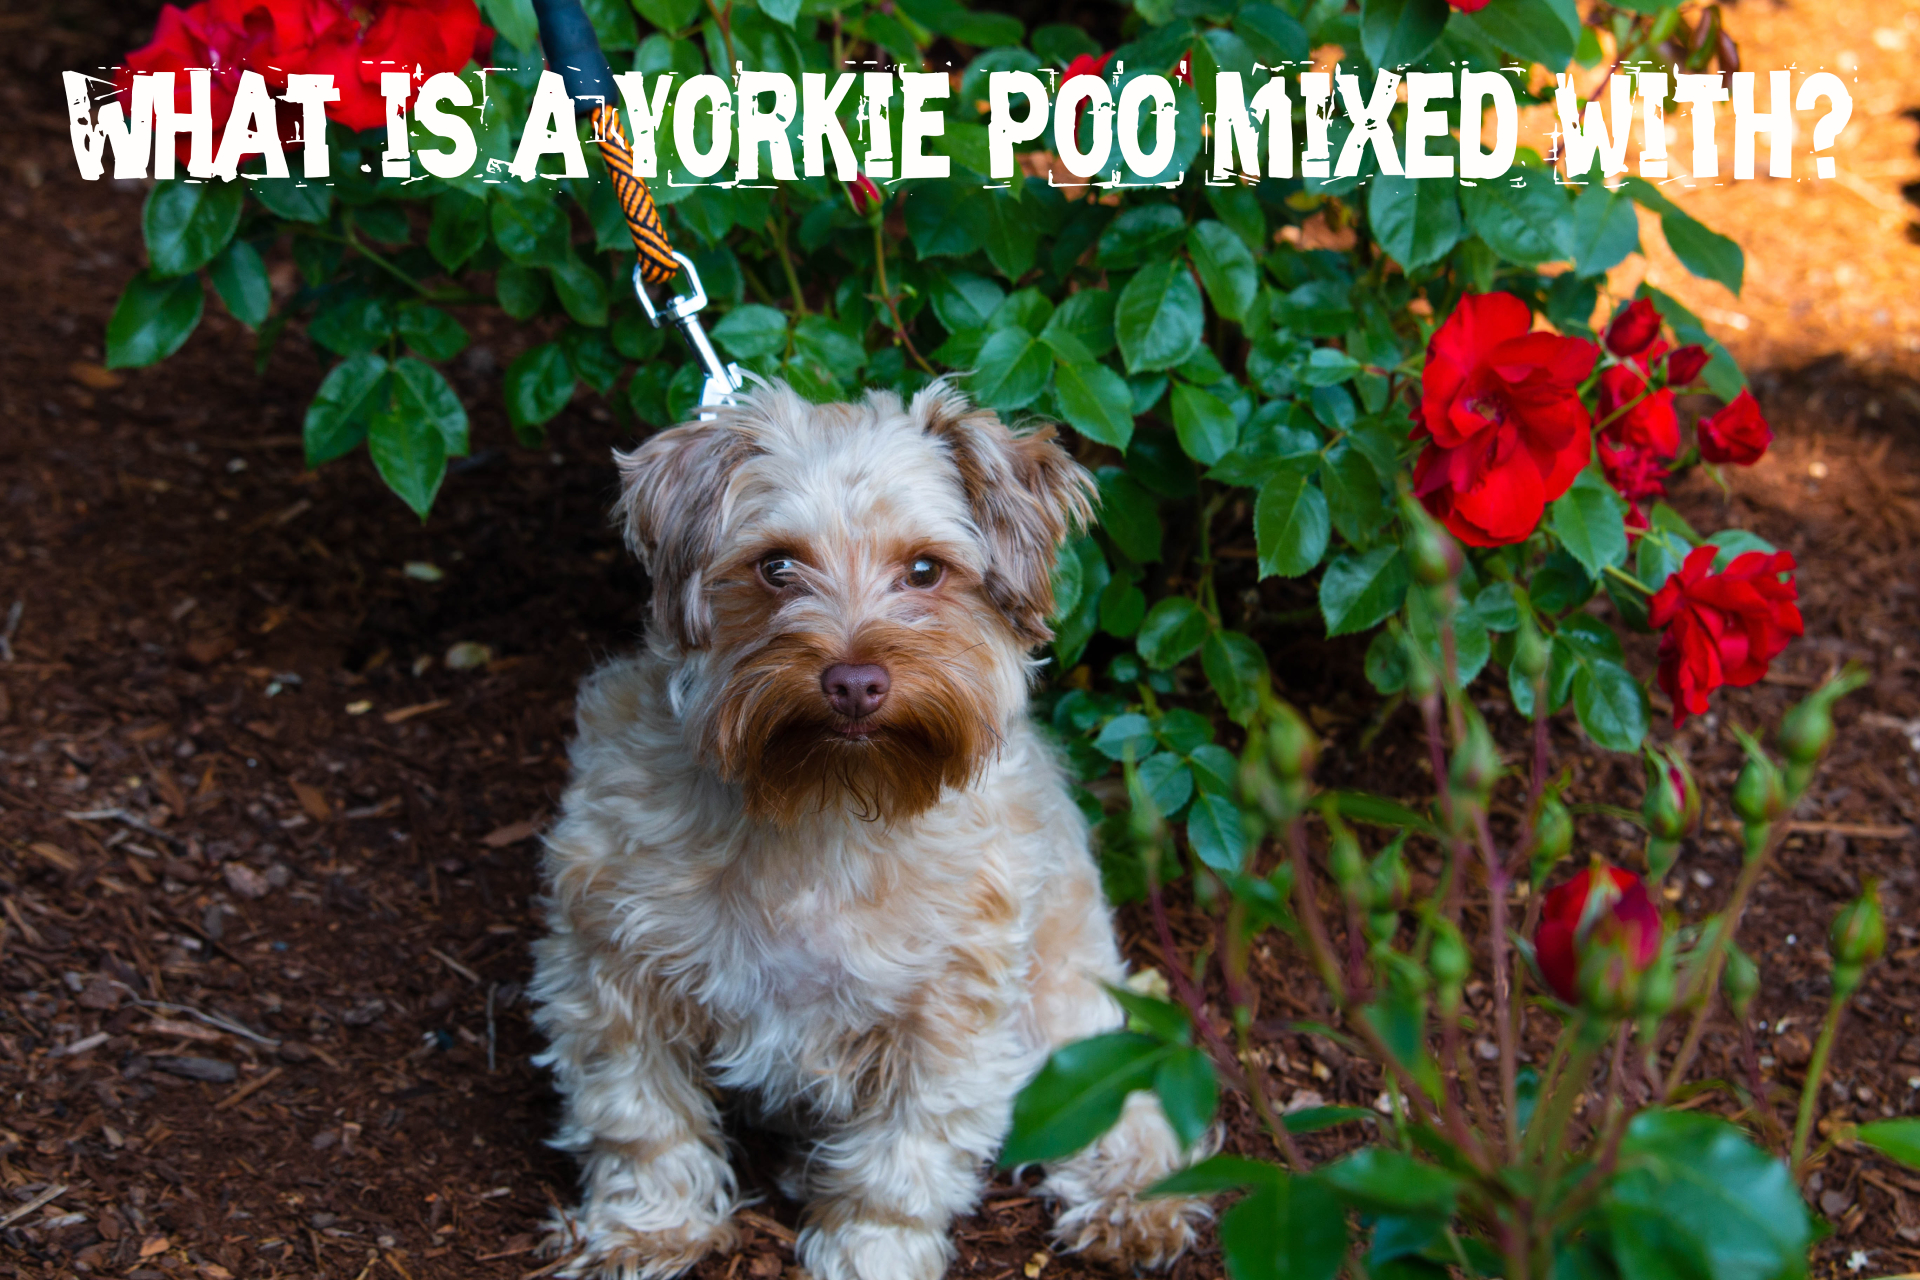 What is a Yorkie Poo mixed with?